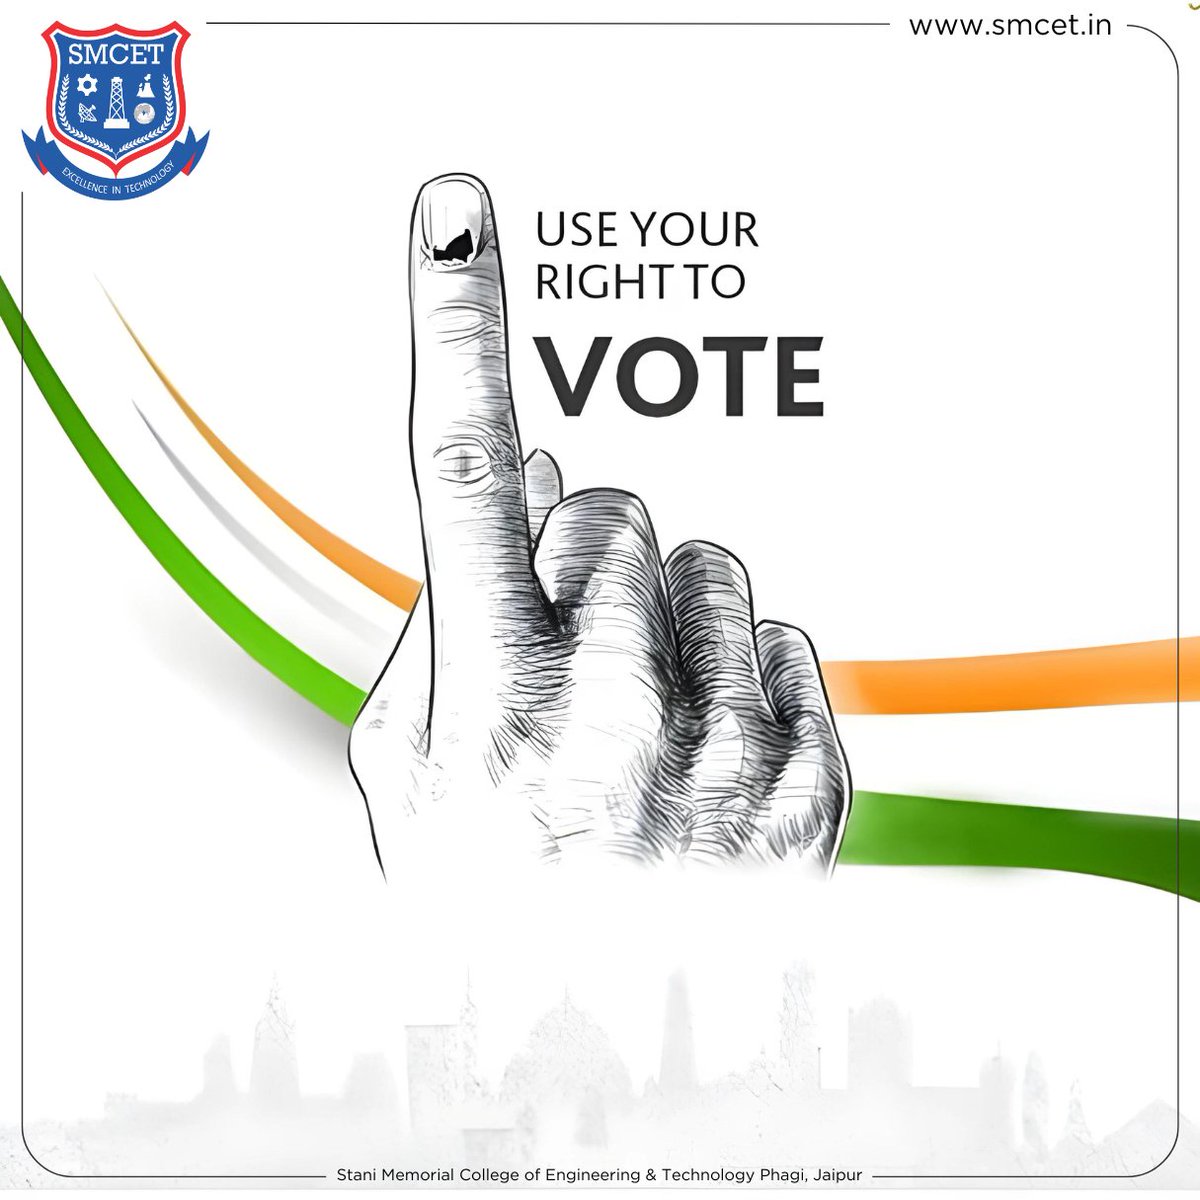 The ballot is stronger than the bullet. Exercise your right to vote on 19 April 2024 and contribute to the strength of our democracy.
#VoteForChange #YourVoiceMatters #DemocracyInAction #VotingDay2024 #Rajasthan  #Loksabha #Loksabhaelection #India #VotingRights